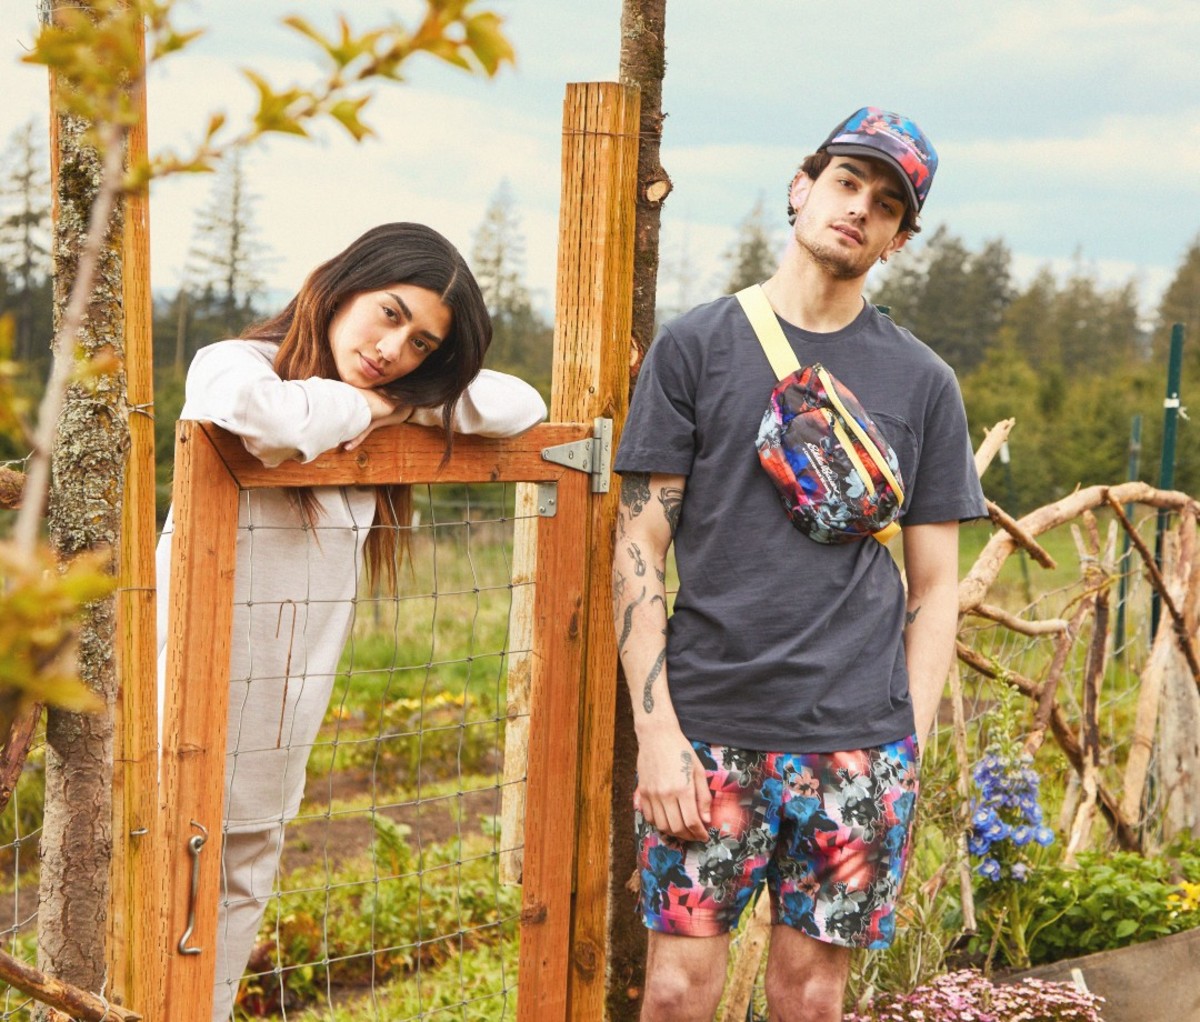 Man and woman on farm posing in colorful clothing